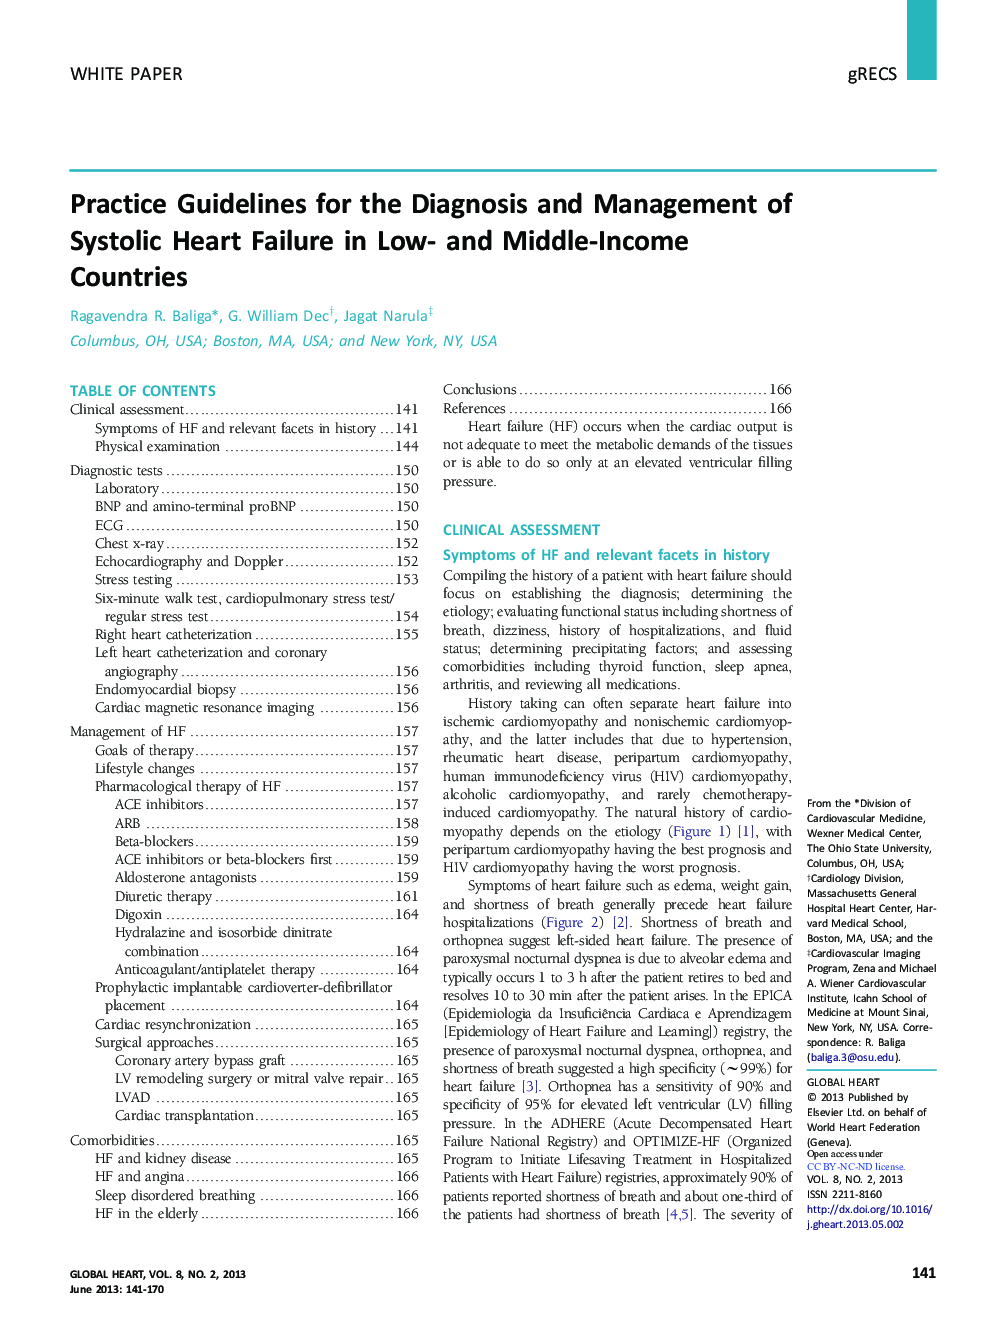 Practice Guidelines for the Diagnosis and Management of Systolic Heart Failure in Low- and Middle-Income Countries